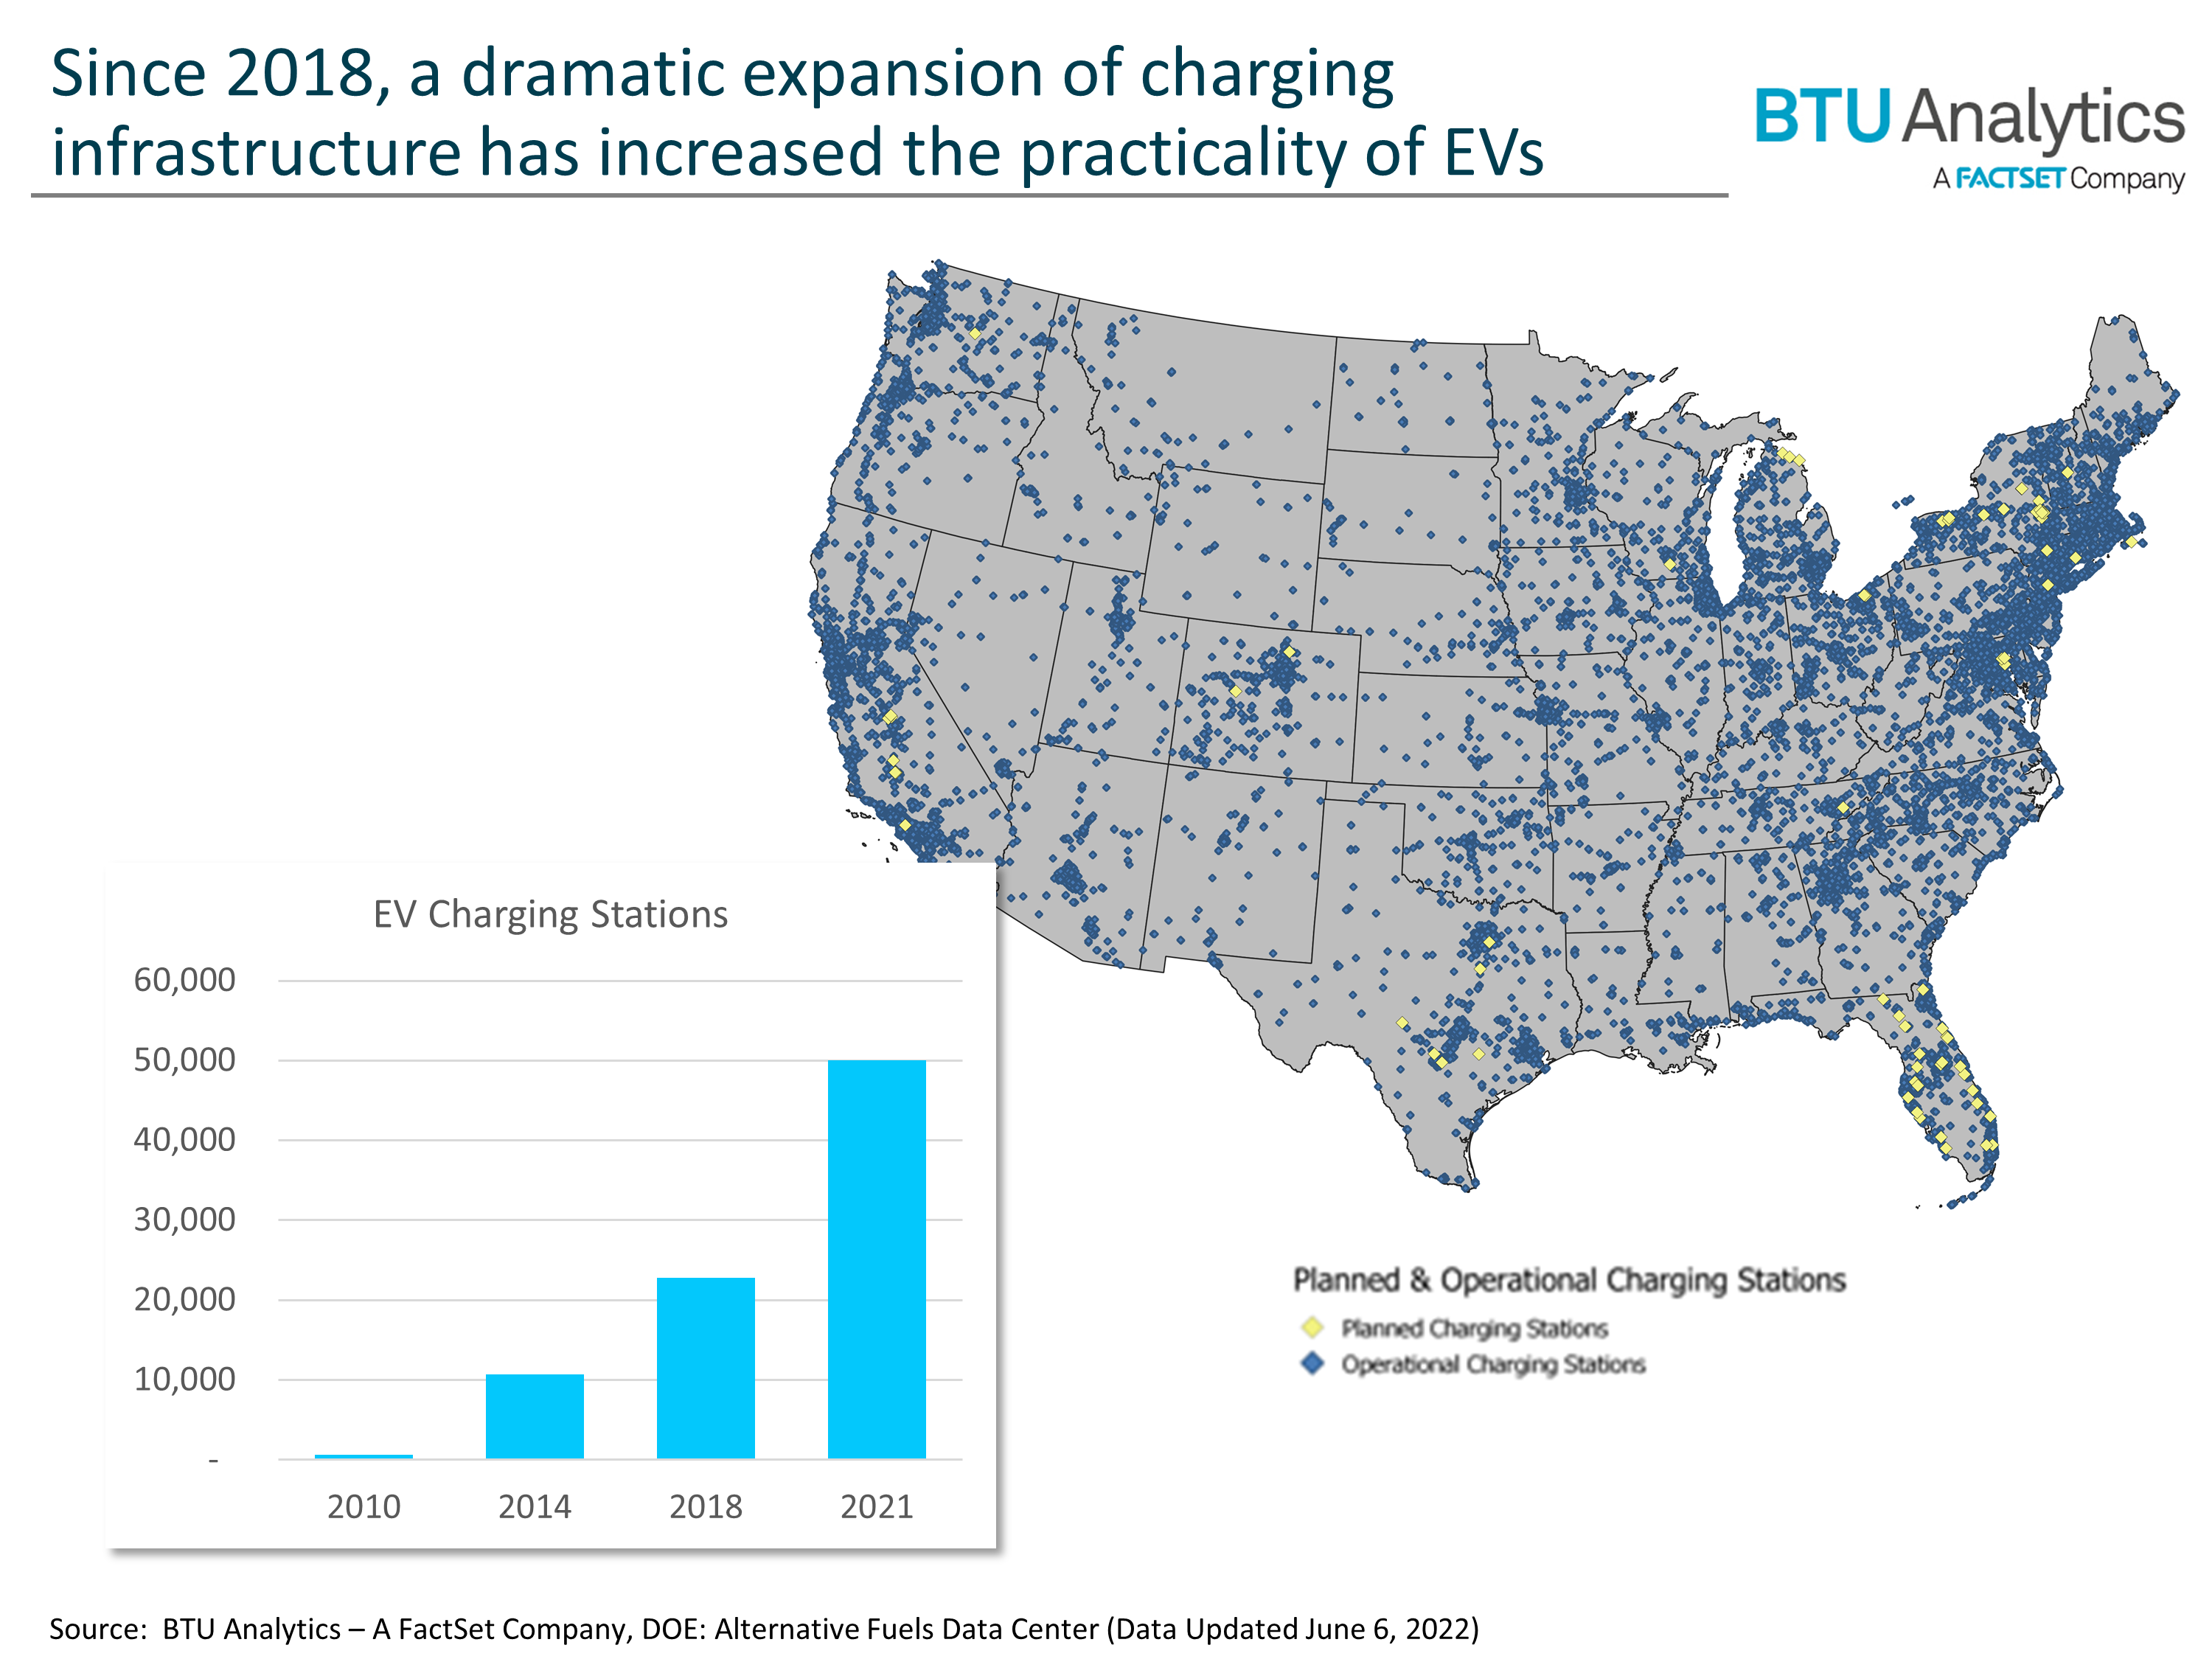 EV charging infrastructure has greatly expanded in recent years, making EVs more practical outside of coastal corridors.